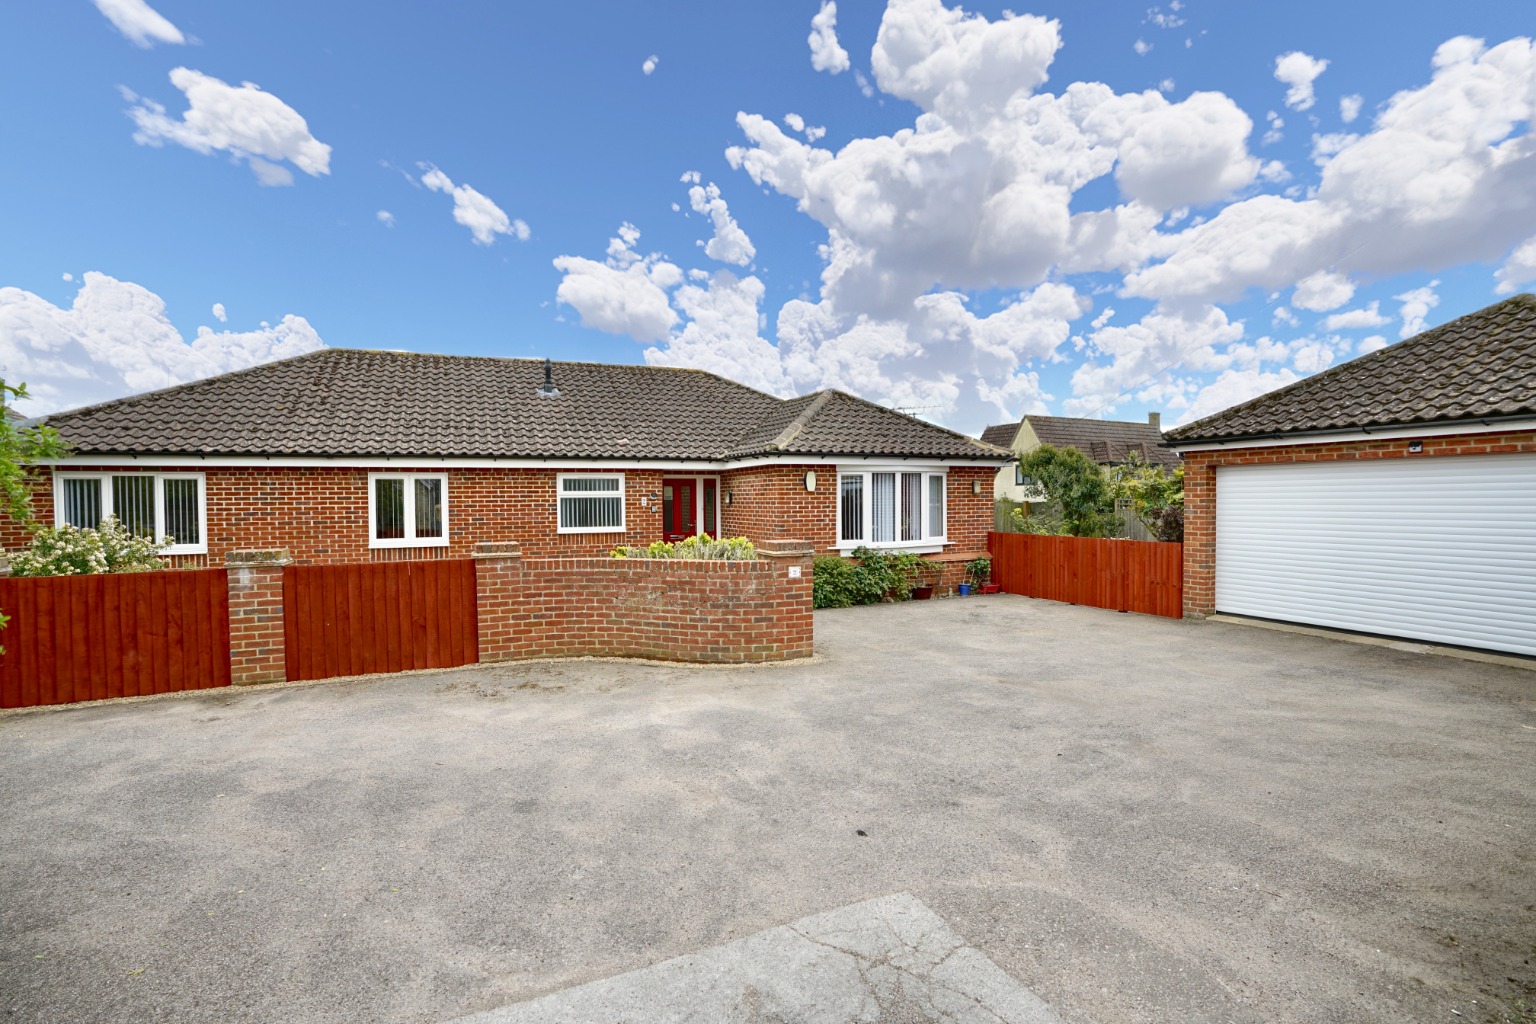 3 bed detached bungalow for sale in Library Walk, Huntingdon - Property Image 1